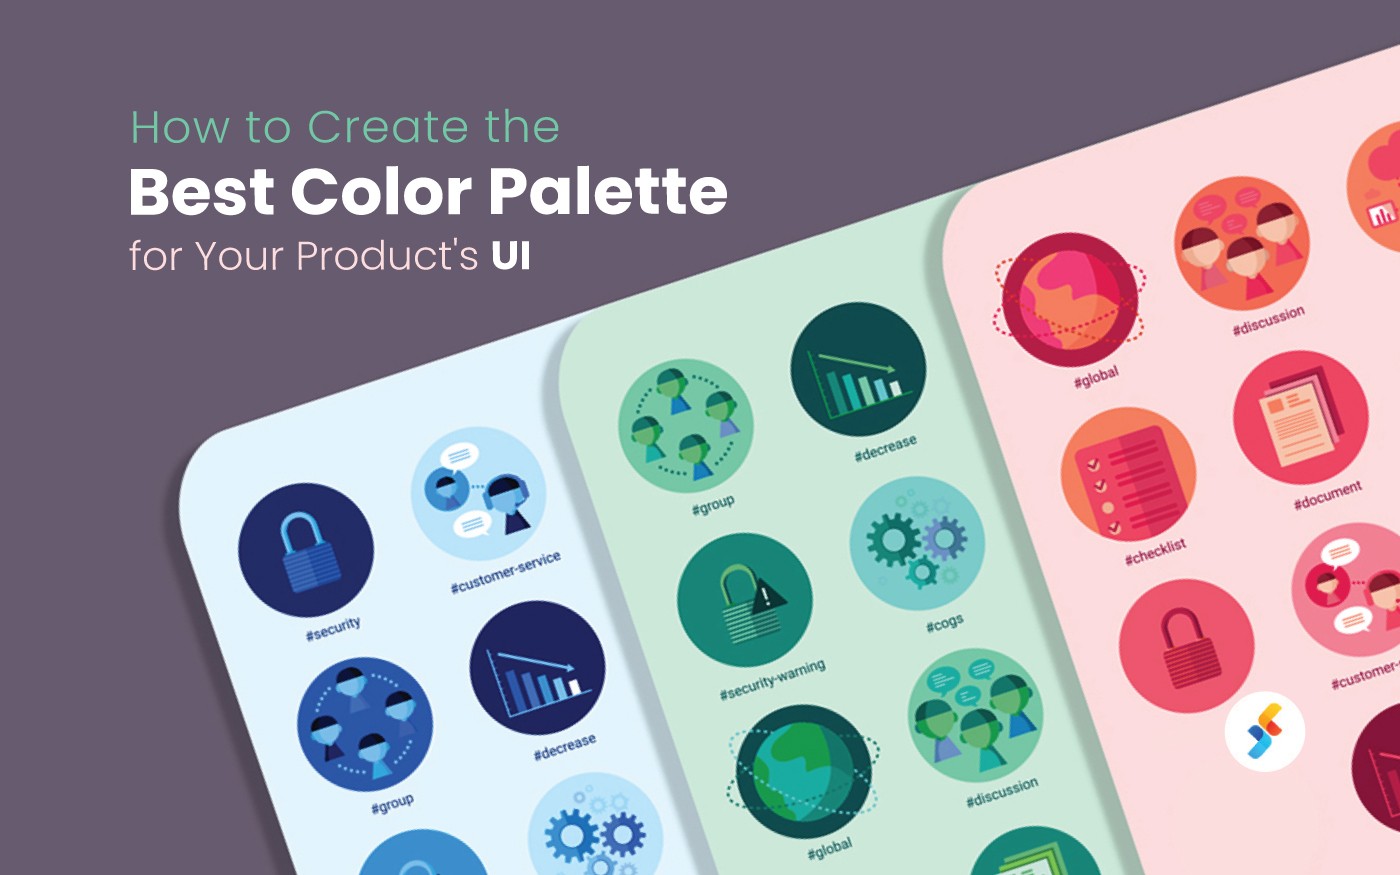 How to Create the Best Color Palette for Your Product’s UI